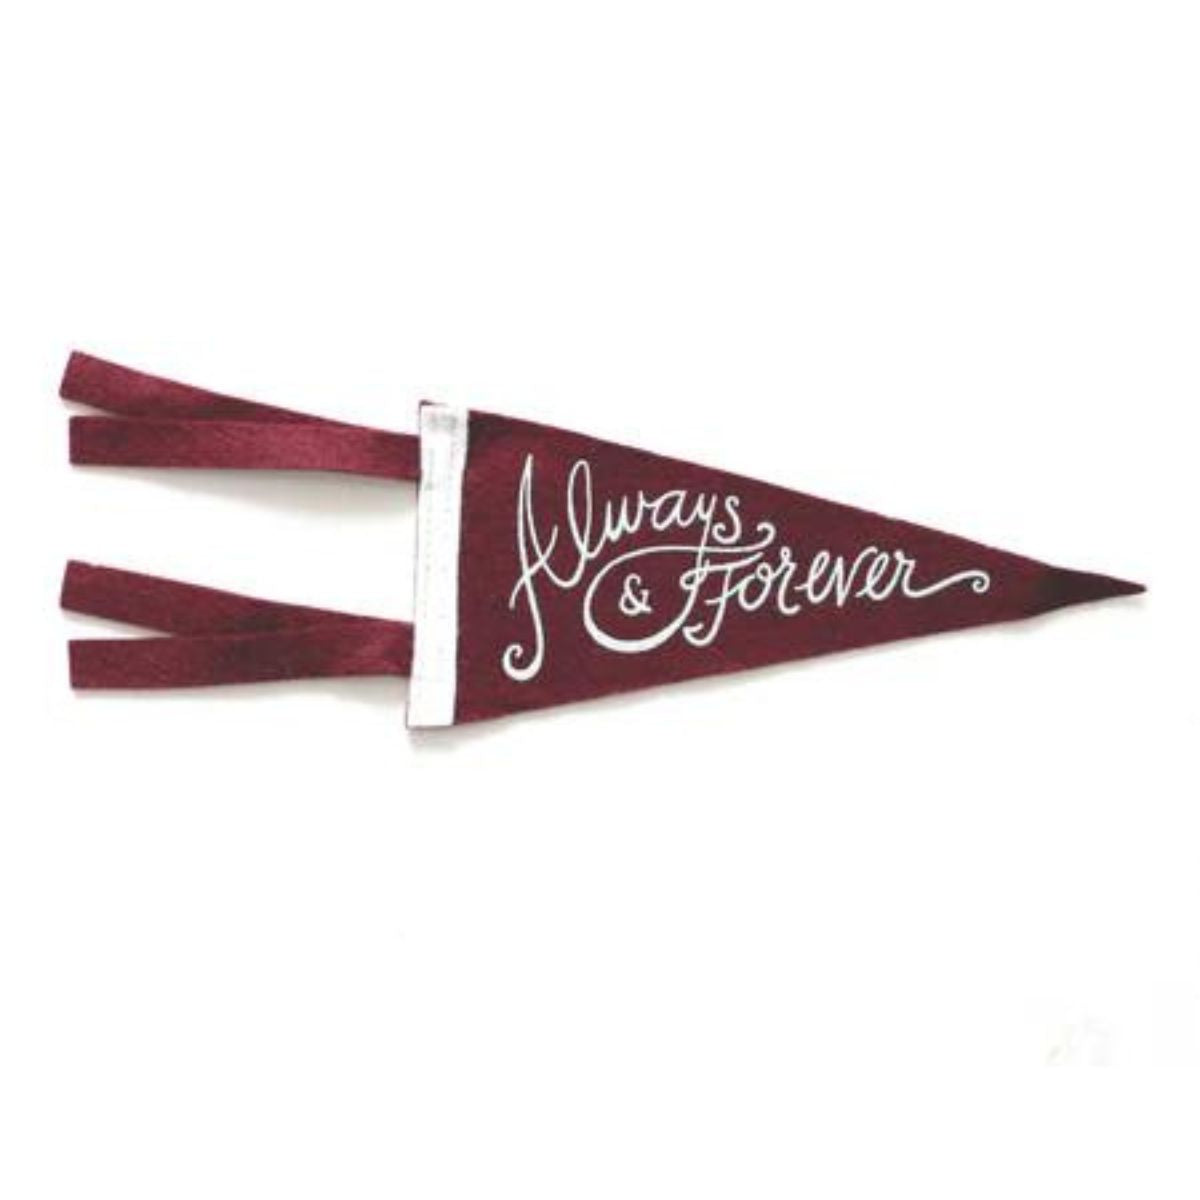 Belle and Union Dare to Rise Pennant-Bespoke Designs